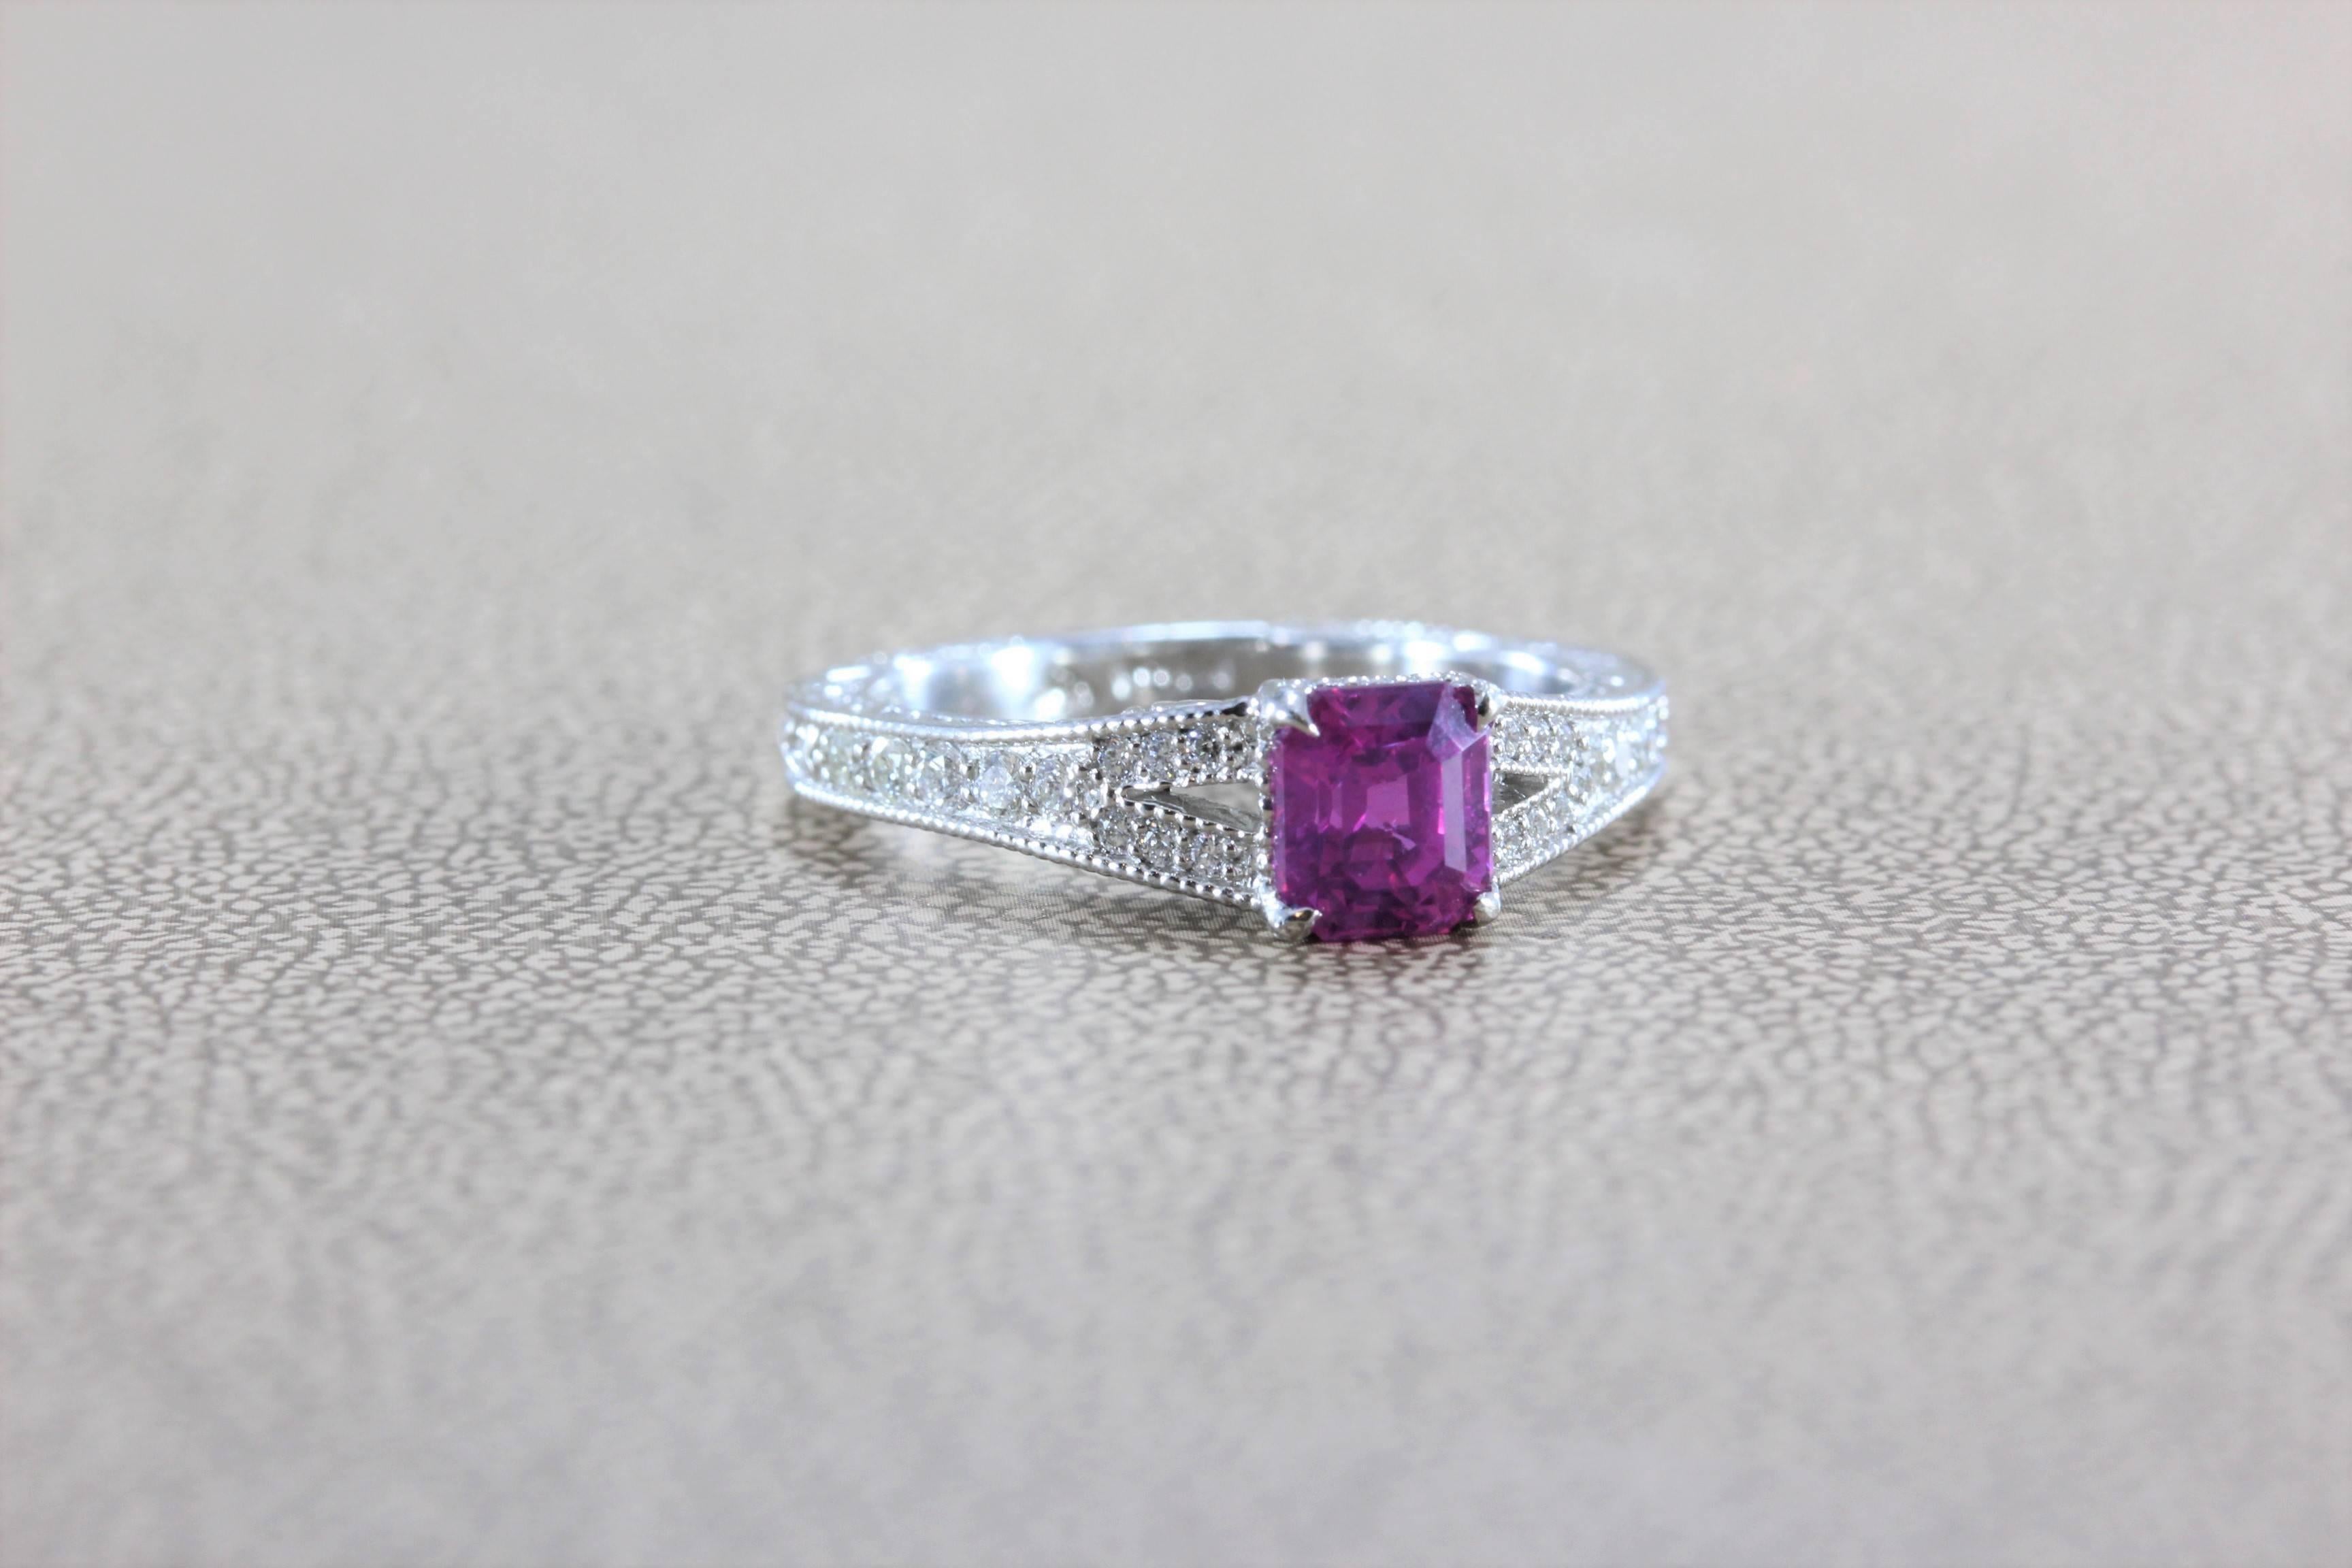 This ring features a superb top gem quality deeply saturated vivid pink sapphire. Such deep and even color is rarely found in gemstones, even of this size. Diamonds accent the center stone, set in platinum, with milgrain setting on this antique